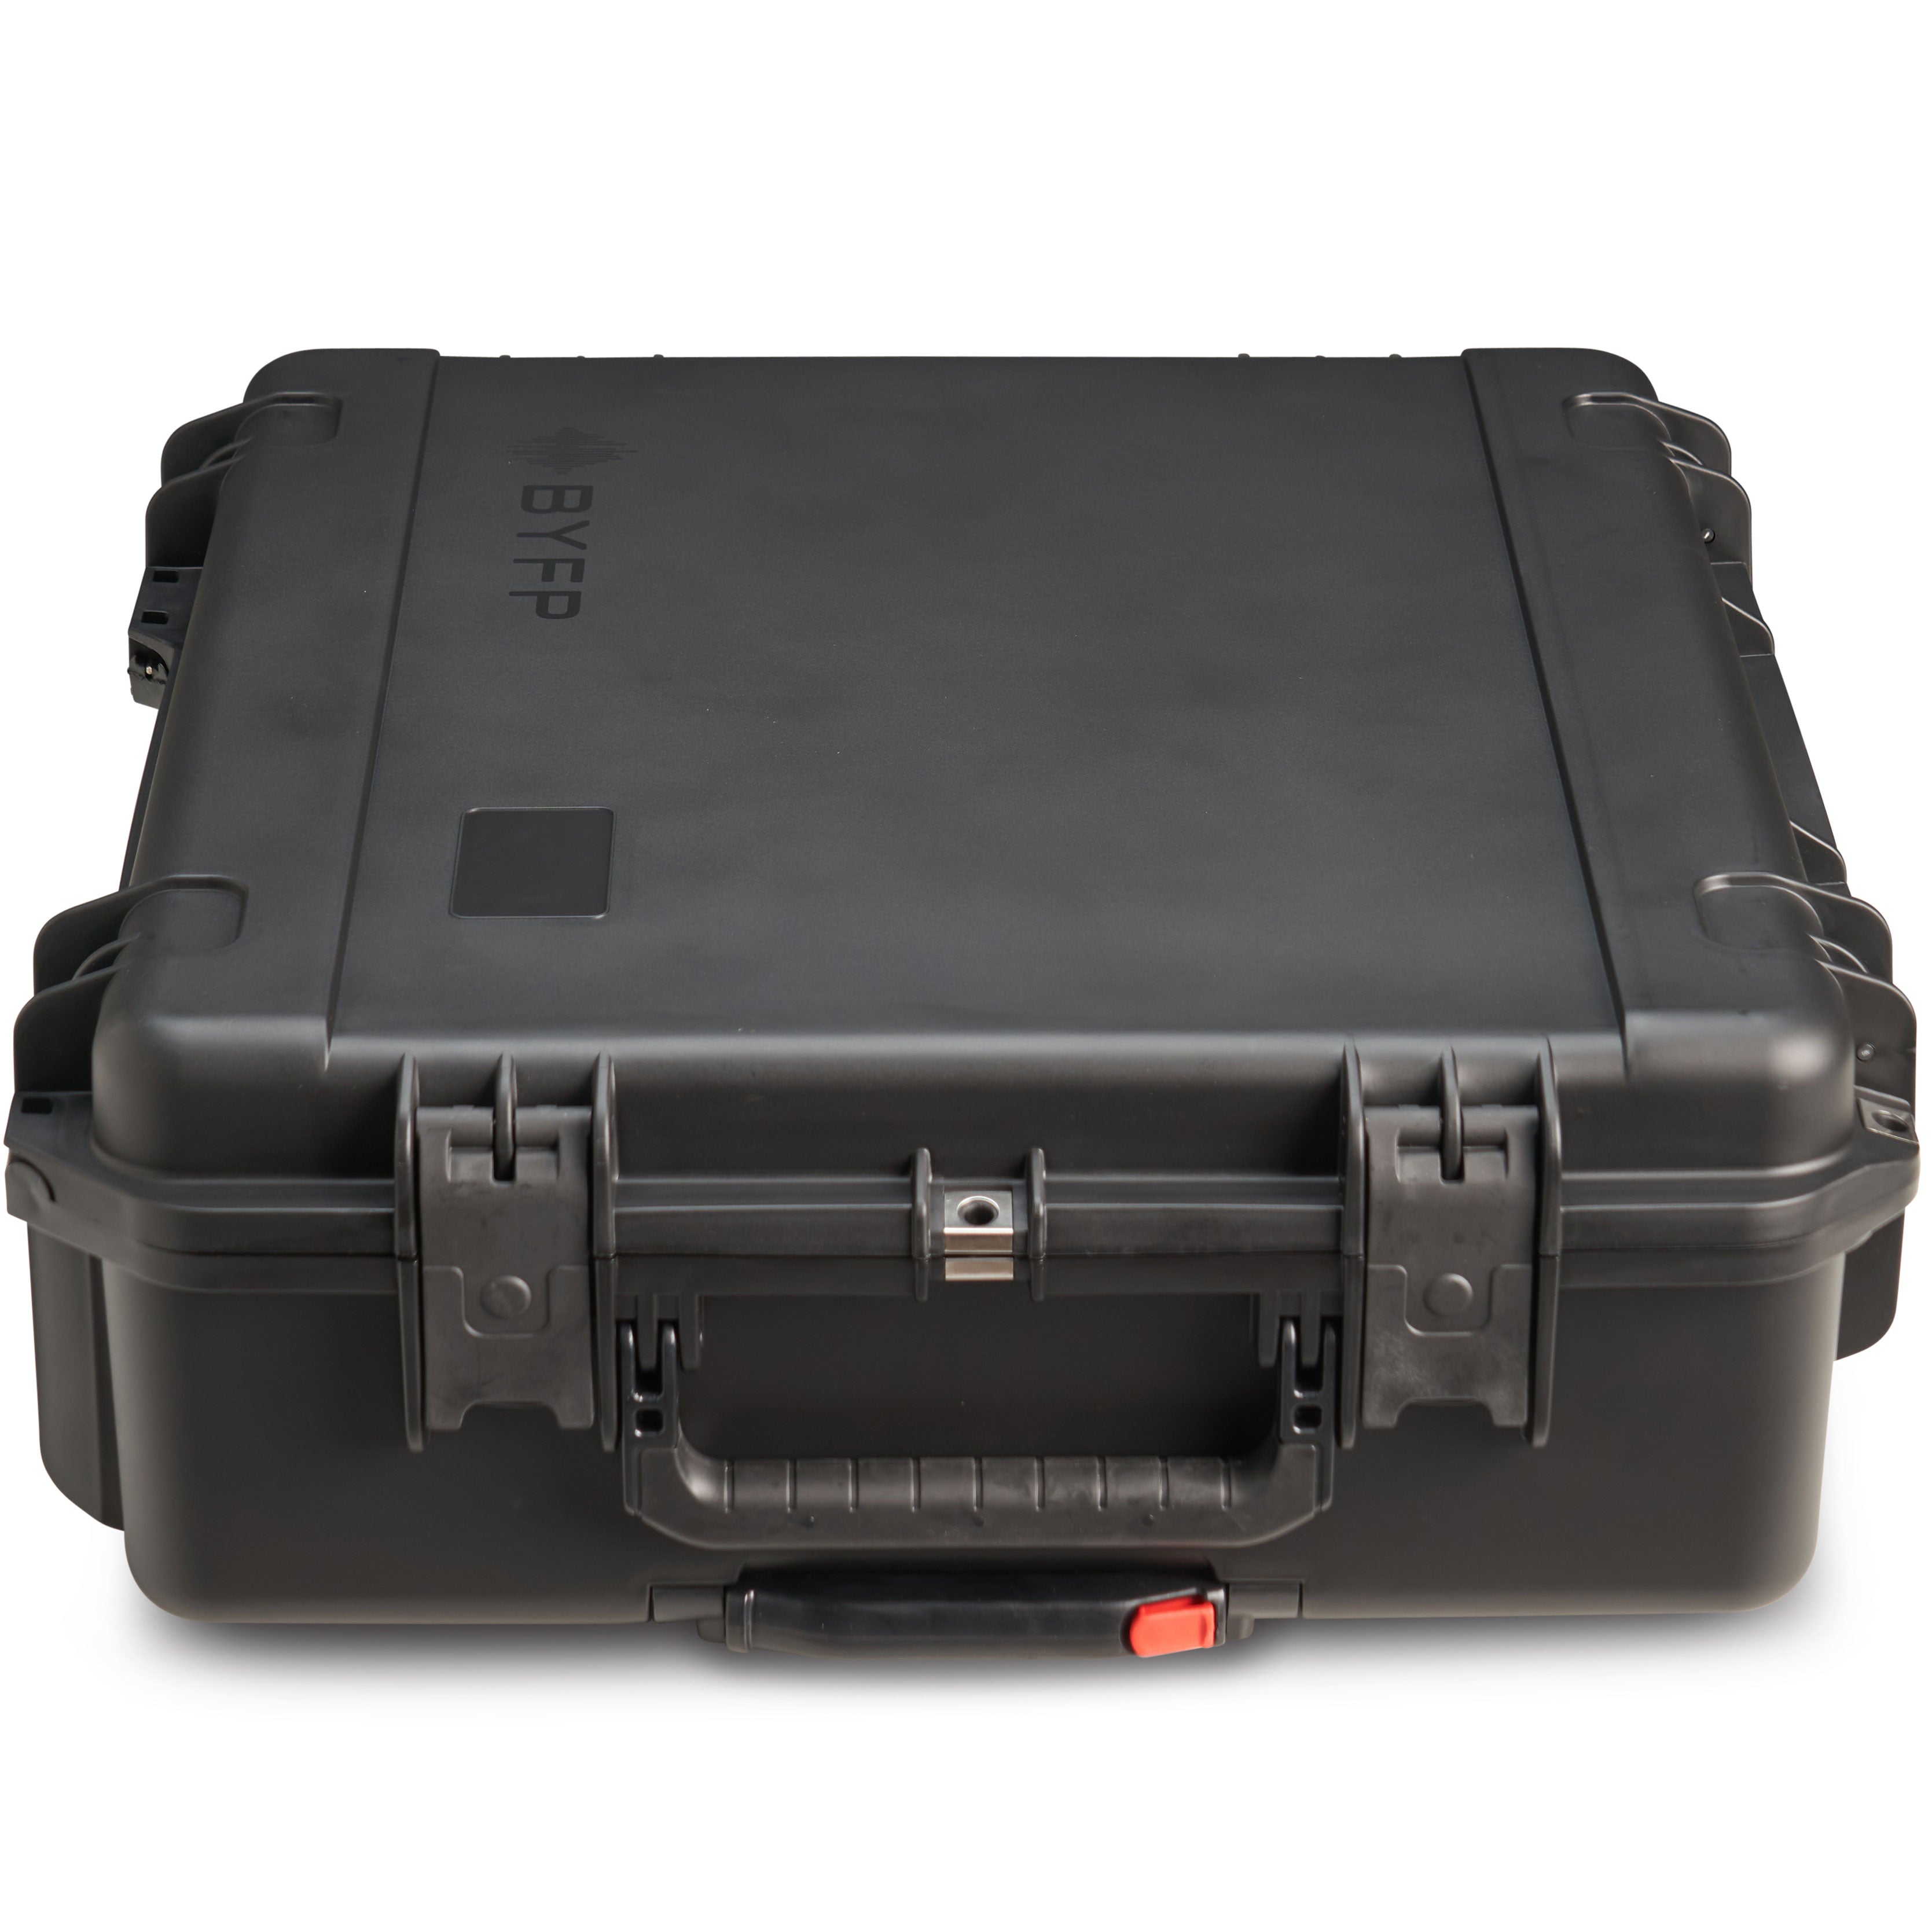 BYFP ipCase for ChamSys QuickQ 20 Lighting Controller